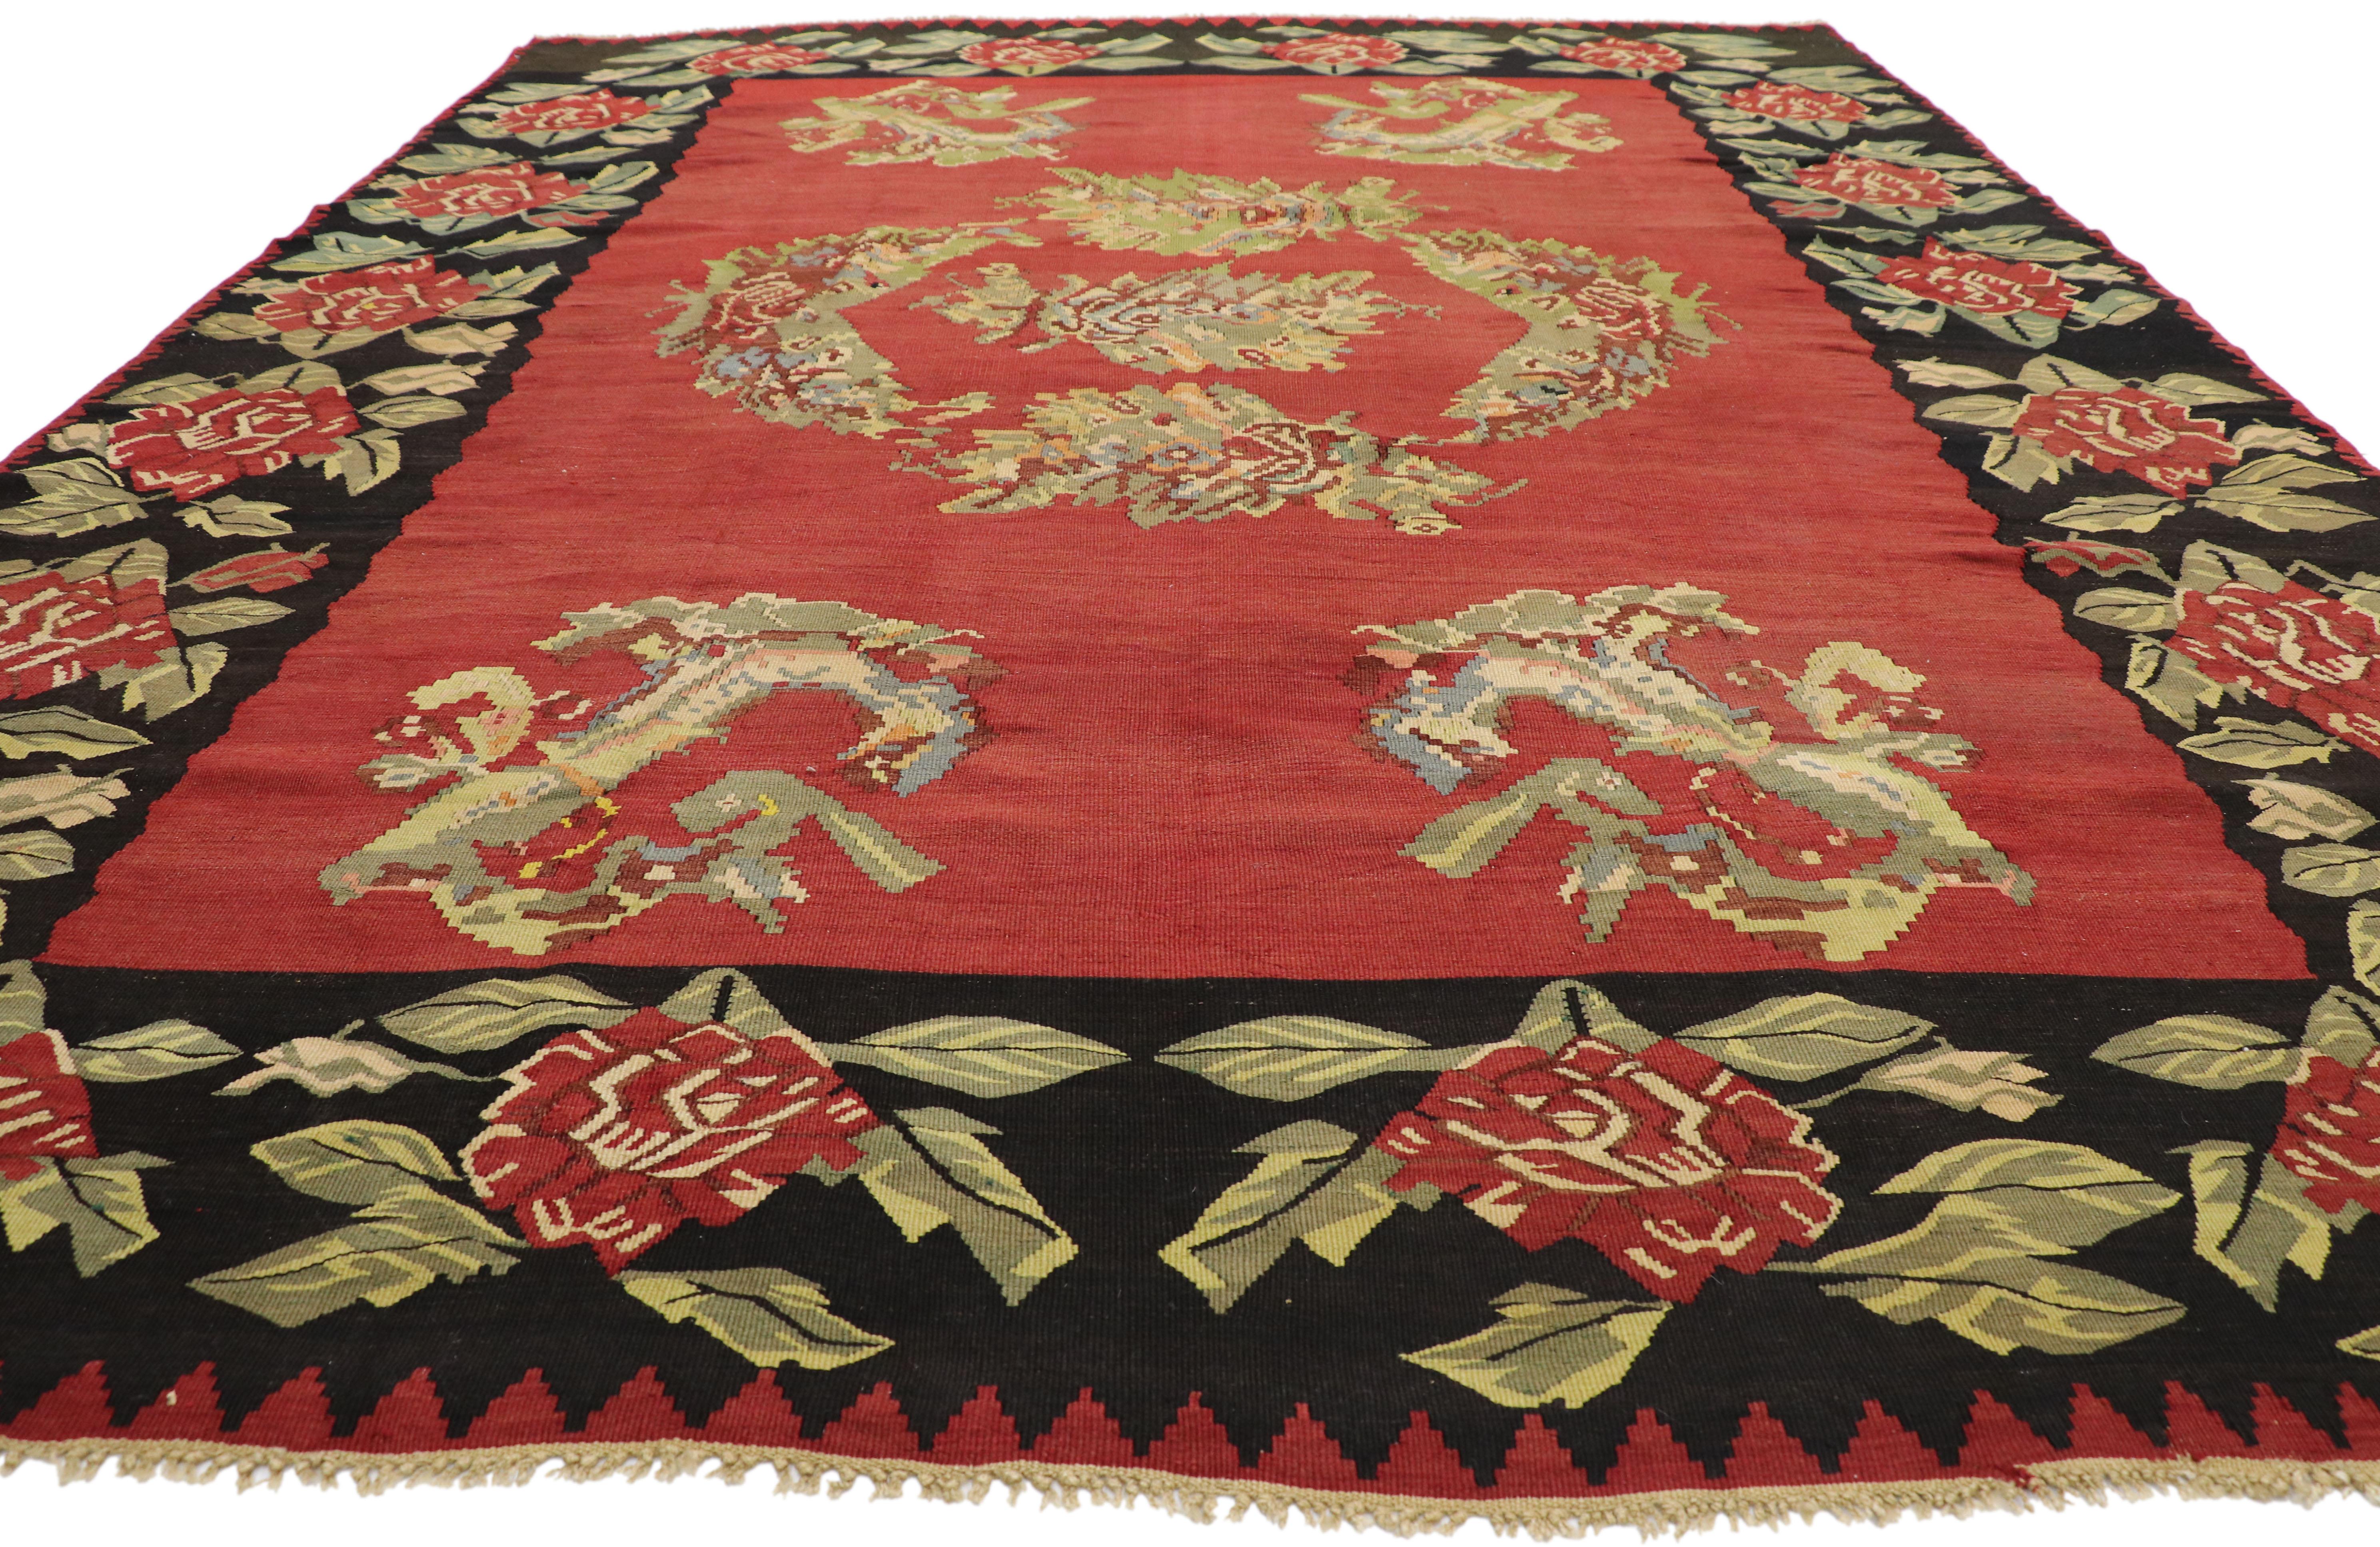 Vintage Floral Turkish Kilim Rug with Chintz Style and Bessarabian Rose Design For Sale 2